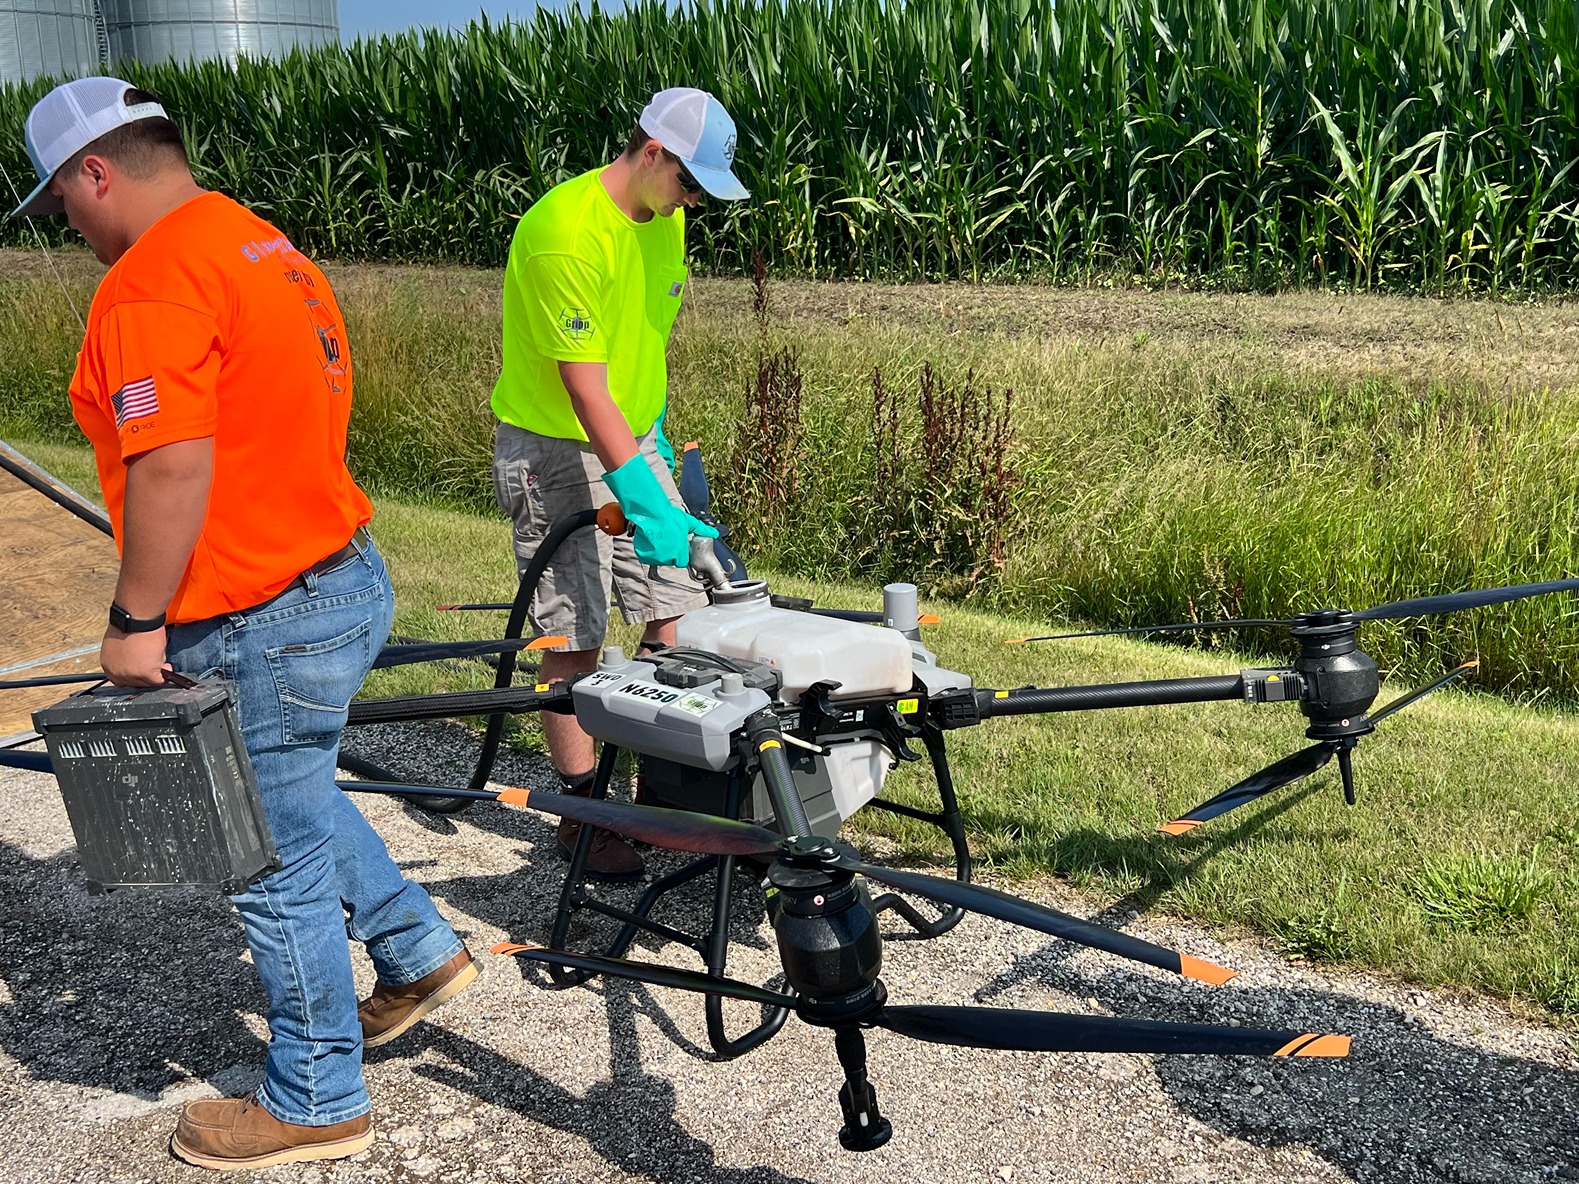 Tyler Ziehm, in a florescent yellow shirt, pumps the precise mixture of chemicals into the drone between the drone's flights